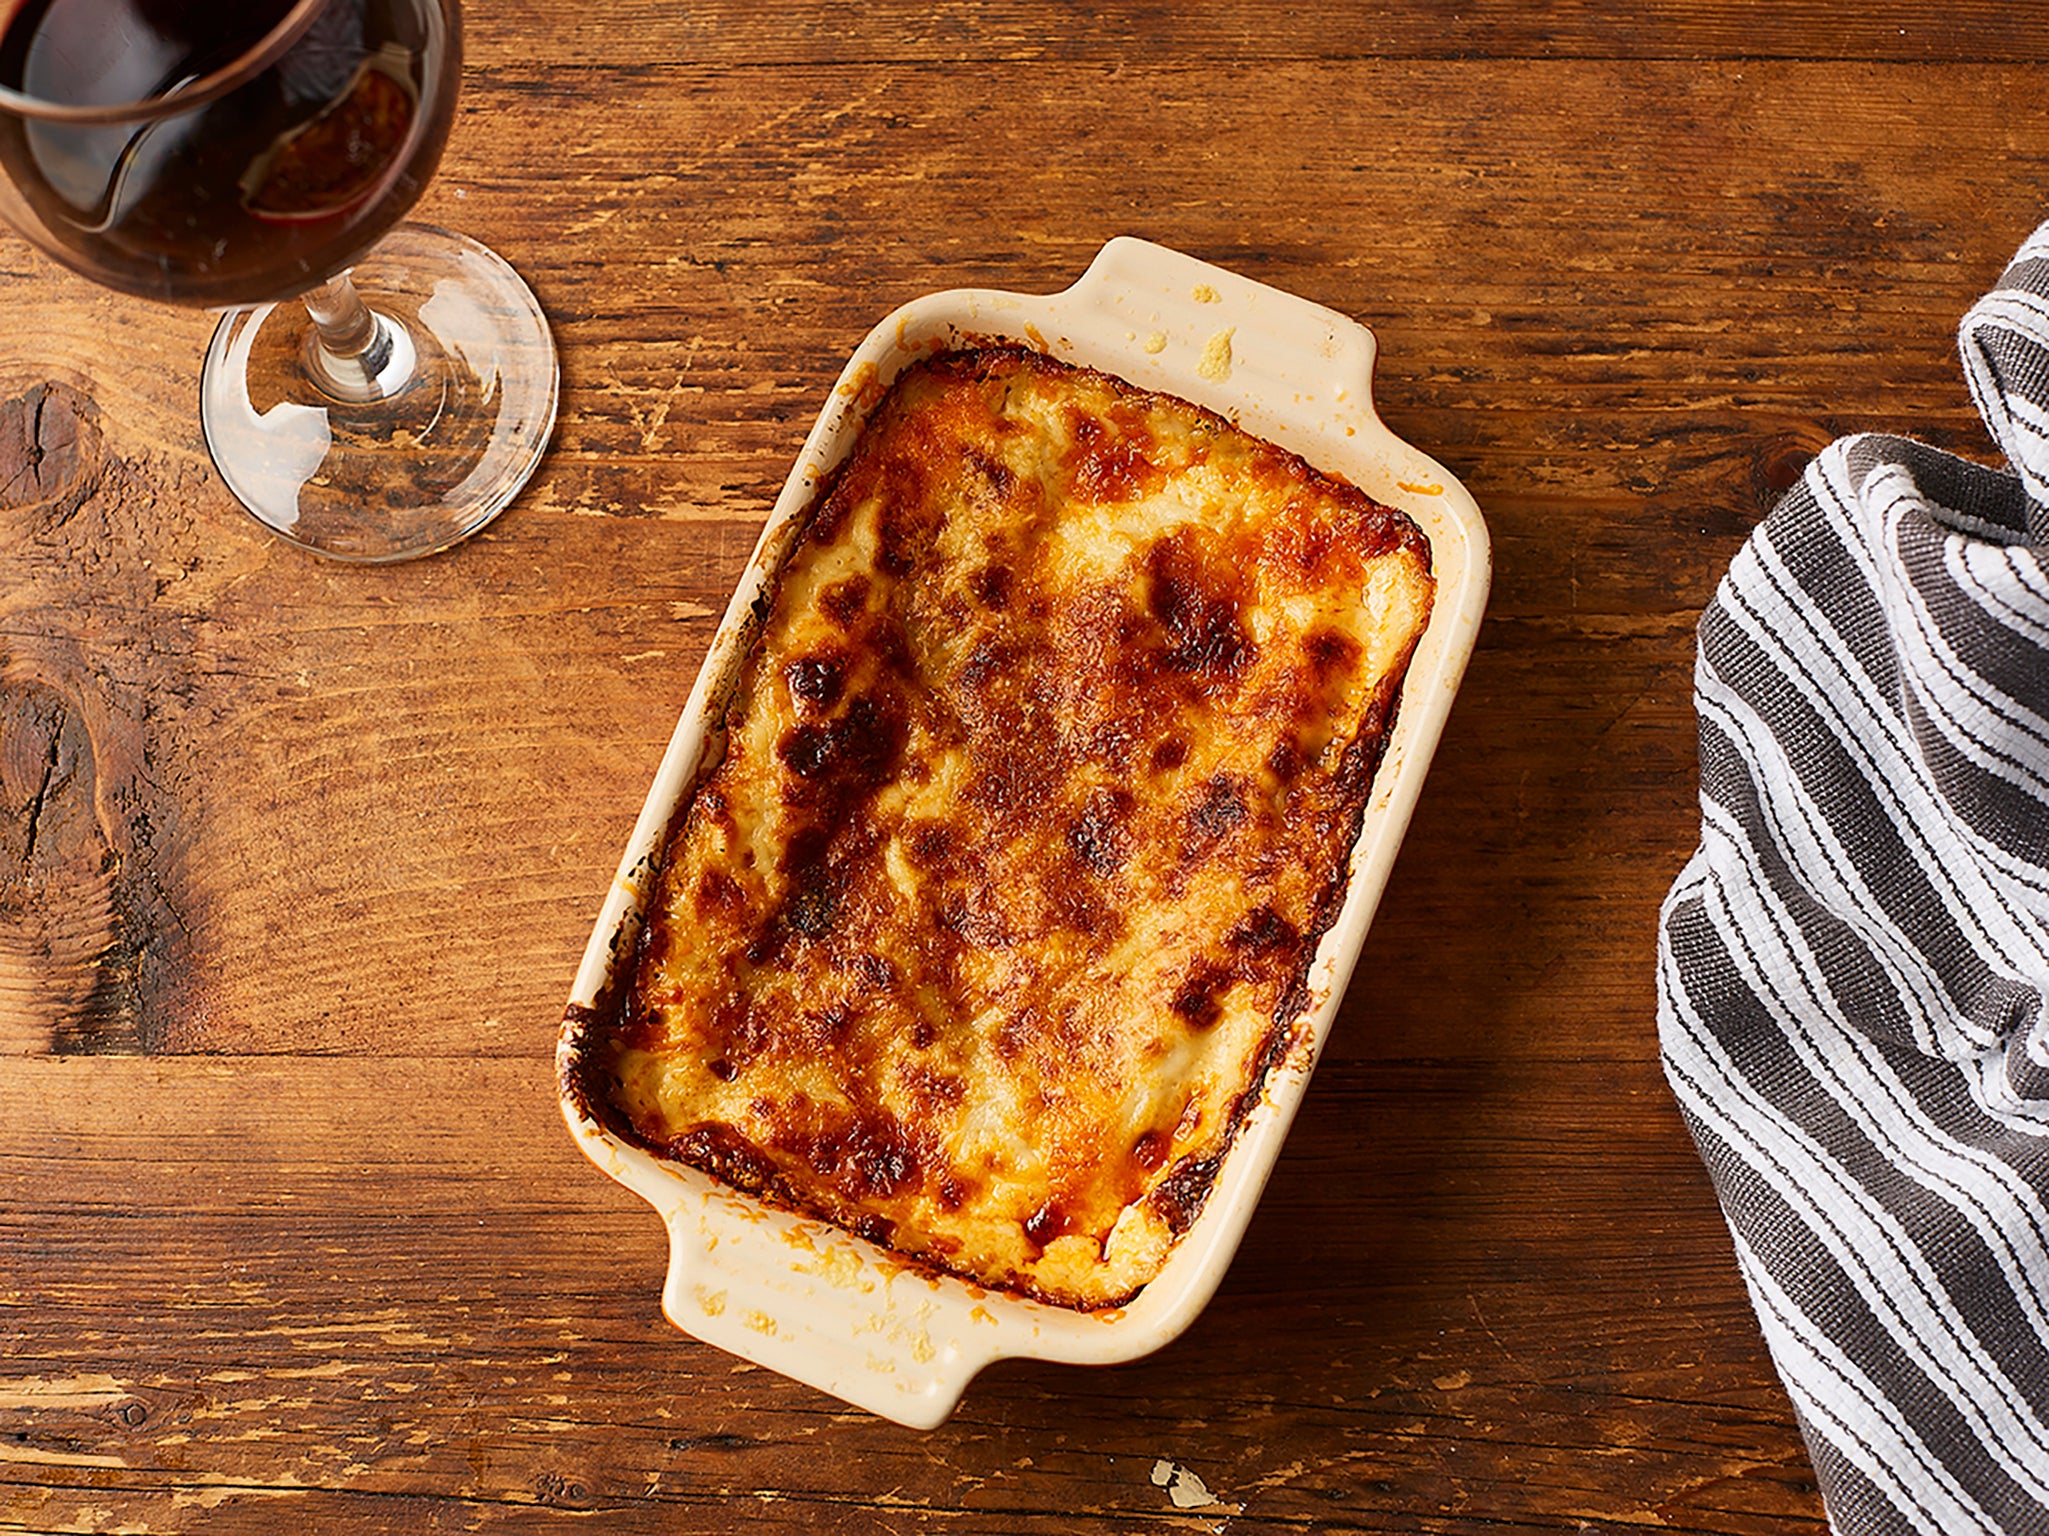 Hearty, warming and great for chilly evenings